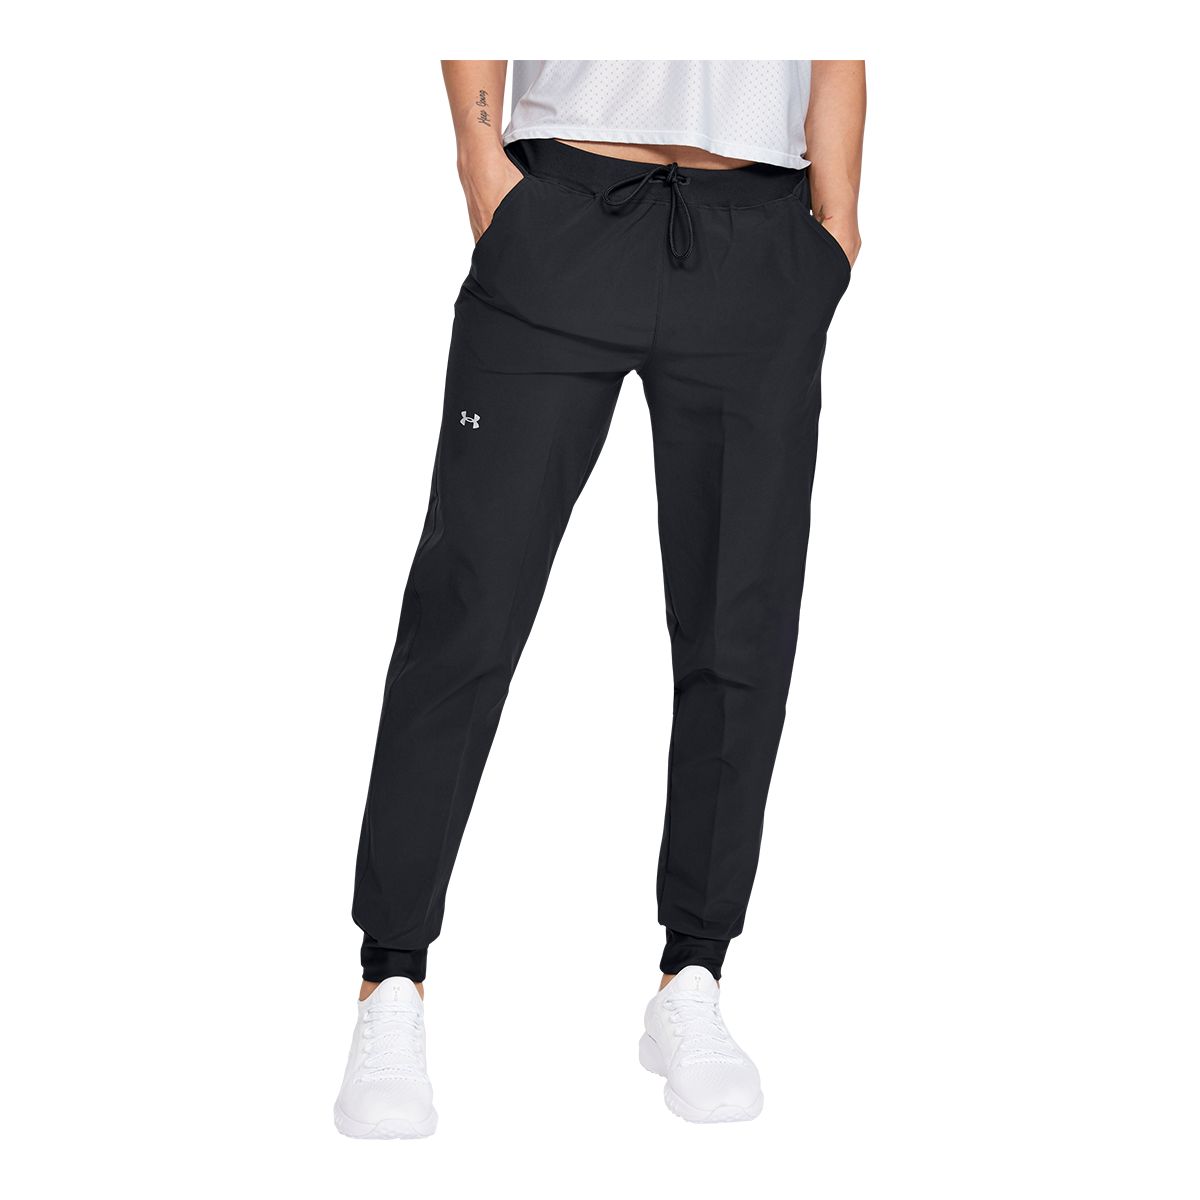 Skechers Women's Restful Joggers, Sweatpants, Casual, Lounge, Training,  Tapered